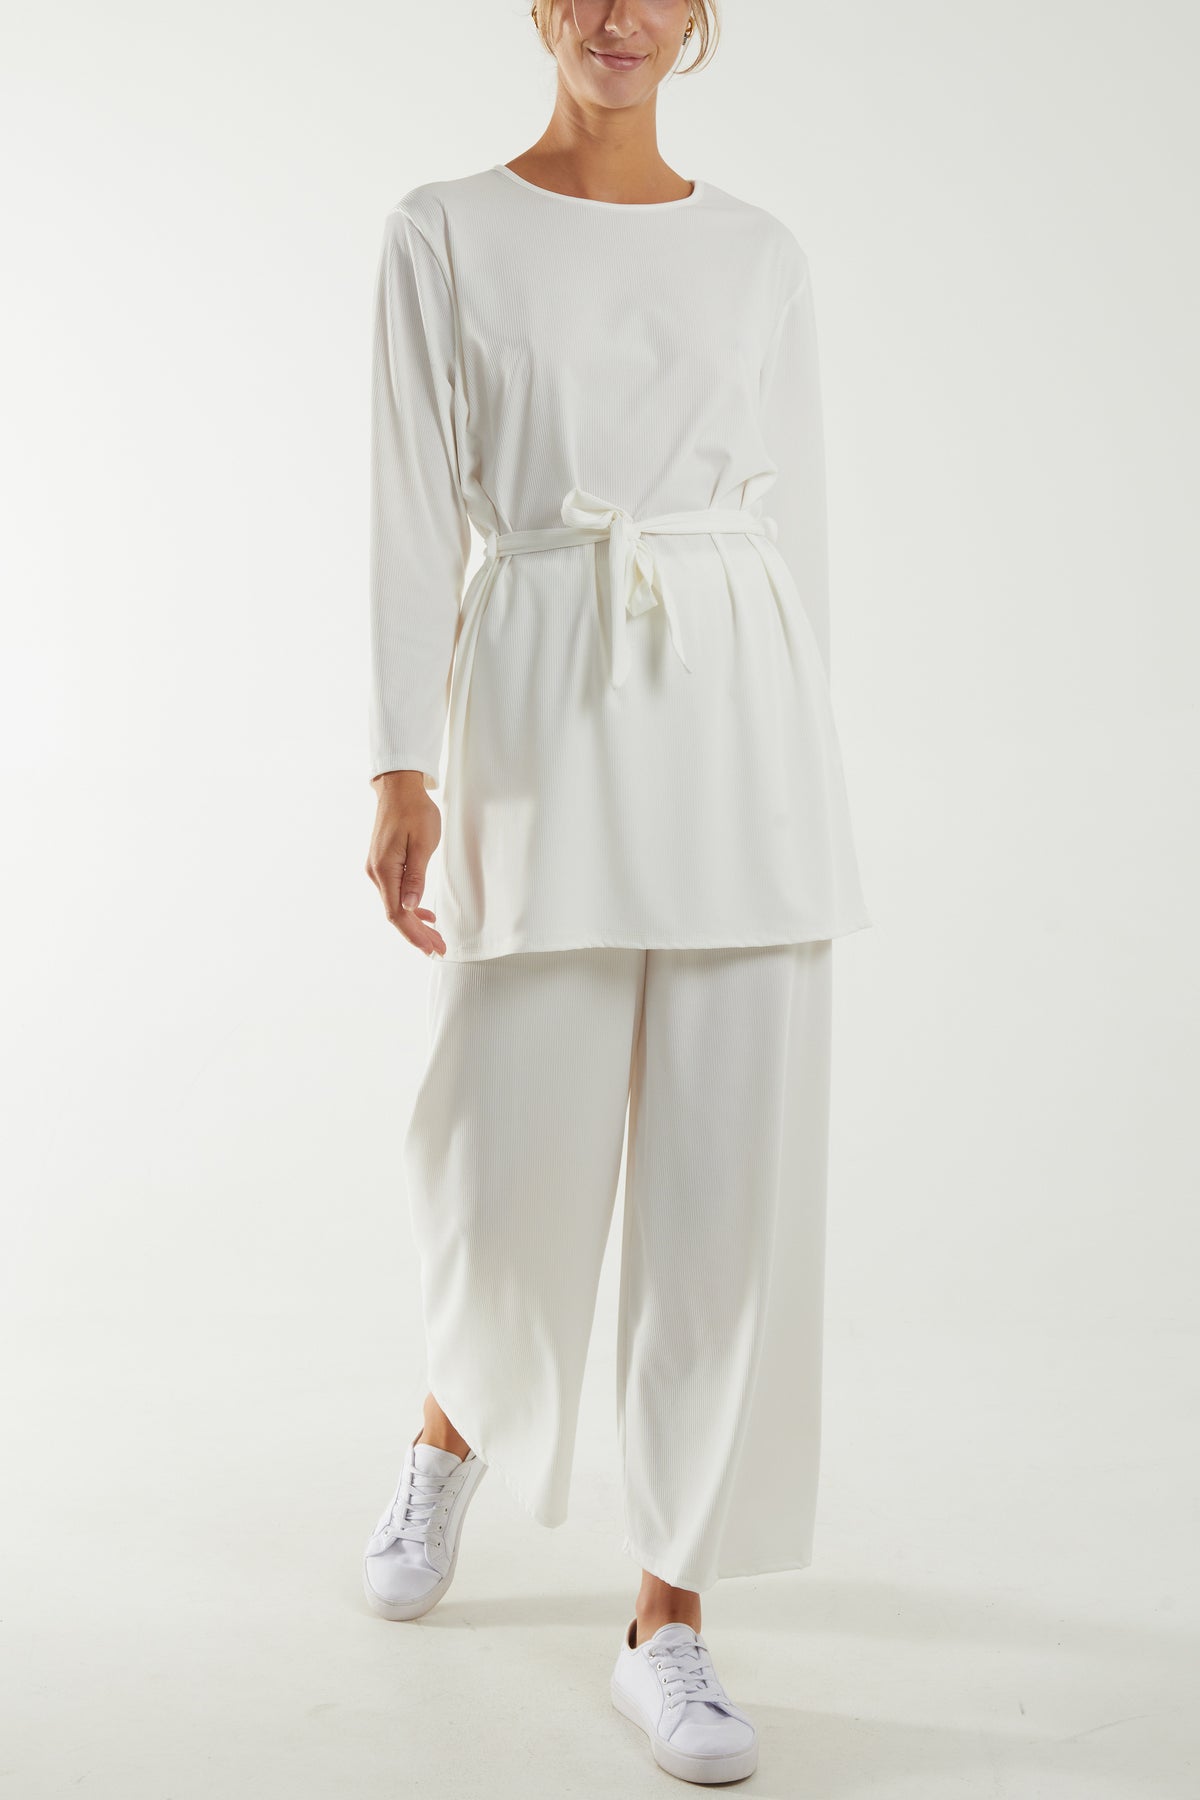 Tied Front Top & Trousers Belted Set